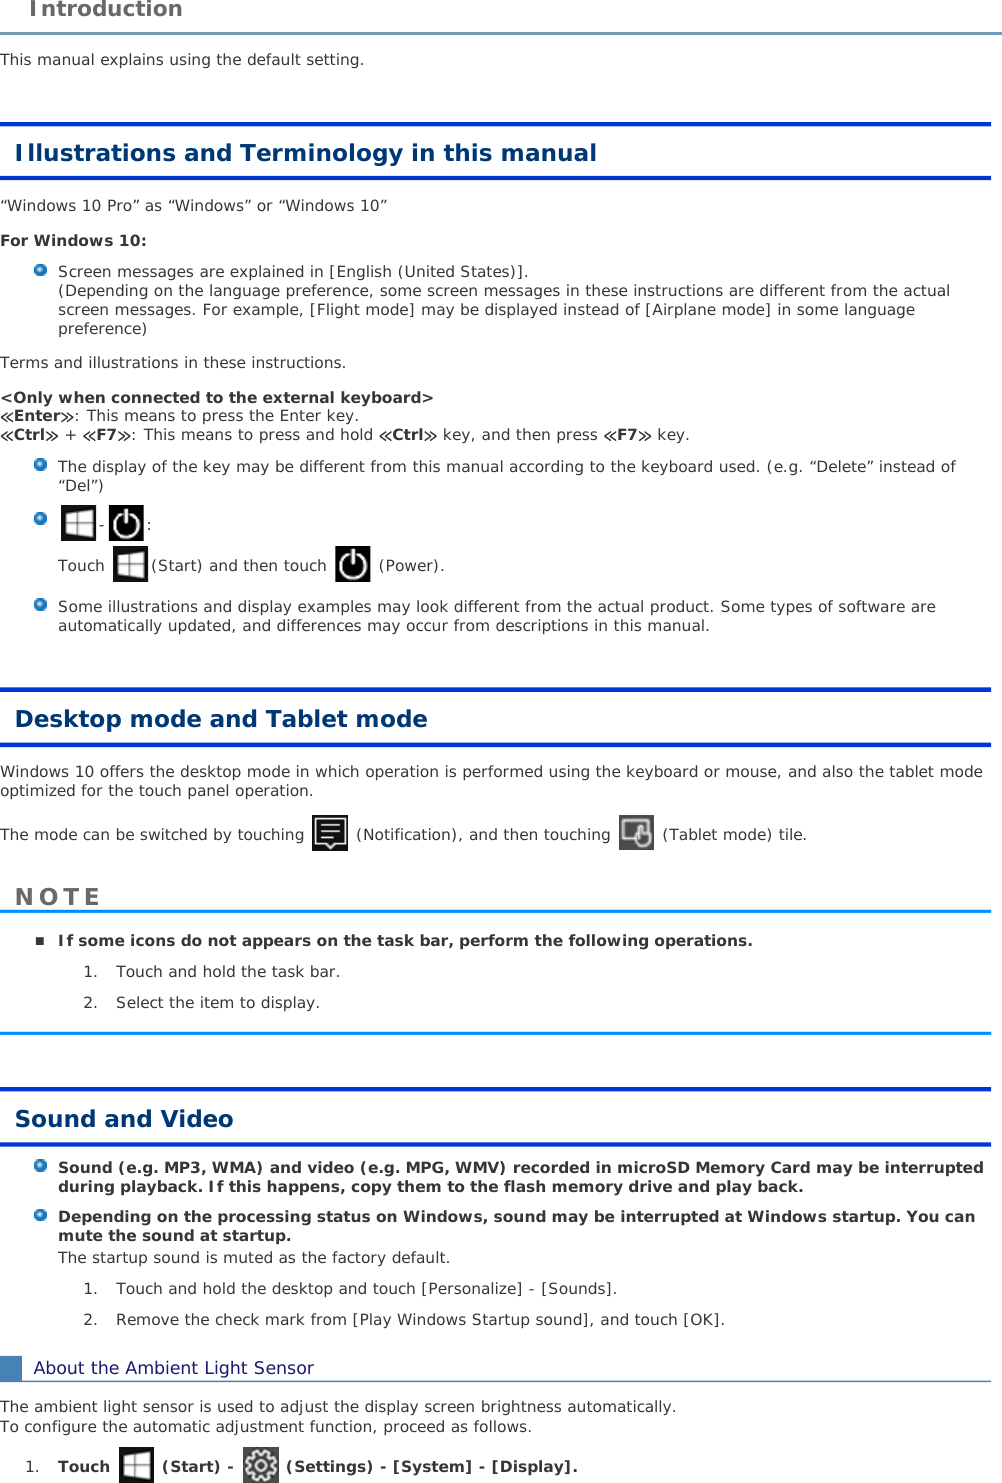 This manual explains using the default setting.Illustrations and Terminology in this manual“Windows 10 Pro” as “Windows” or “Windows 10”For Windows 10:Screen messages are explained in [English (United States)].(Depending on the language preference, some screen messages in these instructions are different from the actual screen messages. For example, [Flight mode] may be displayed instead of [Airplane mode] in some languagepreference) Terms and illustrations in these instructions.&lt;Only when connected to the external keyboard&gt;≪Enter≫: This means to press the Enter key.≪Ctrl≫ + ≪F7≫: This means to press and hold ≪Ctrl≫ key, and then press ≪F7≫ key. The display of the key may be different from this manual according to the keyboard used. (e.g. “Delete” instead of“Del”) -:Touch  (Start) and then touch (Power).Some illustrations and display examples may look different from the actual product. Some types of software are automatically updated, and differences may occur from descriptions in this manual. Desktop mode and Tablet modeWindows 10 offers the desktop mode in which operation is performed using the keyboard or mouse, and also the tablet mode optimized for the touch panel operation. The mode can be switched by touching   (Notification), and then touching   (Tablet mode) tile.If some icons do not appears on the task bar, perform the following operations.1. Touch and hold the task bar.2. Select the item to display.Sound and VideoSound (e.g. MP3, WMA) and video (e.g. MPG, WMV) recorded in microSD Memory Card may be interrupted during playback. If this happens, copy them to the flash memory drive and play back.Depending on the processing status on Windows, sound may be interrupted at Windows startup. You can mute the sound at startup.The startup sound is muted as the factory default.1. Touch and hold the desktop and touch [Personalize] - [Sounds].2. Remove the check mark from [Play Windows Startup sound], and touch [OK].About the Ambient Light SensorThe ambient light sensor is used to adjust the display screen brightness automatically. To configure the automatic adjustment function, proceed as follows. 1. Touch  (Start) -  (Settings) - [System] - [Display].IntroductionNOTE